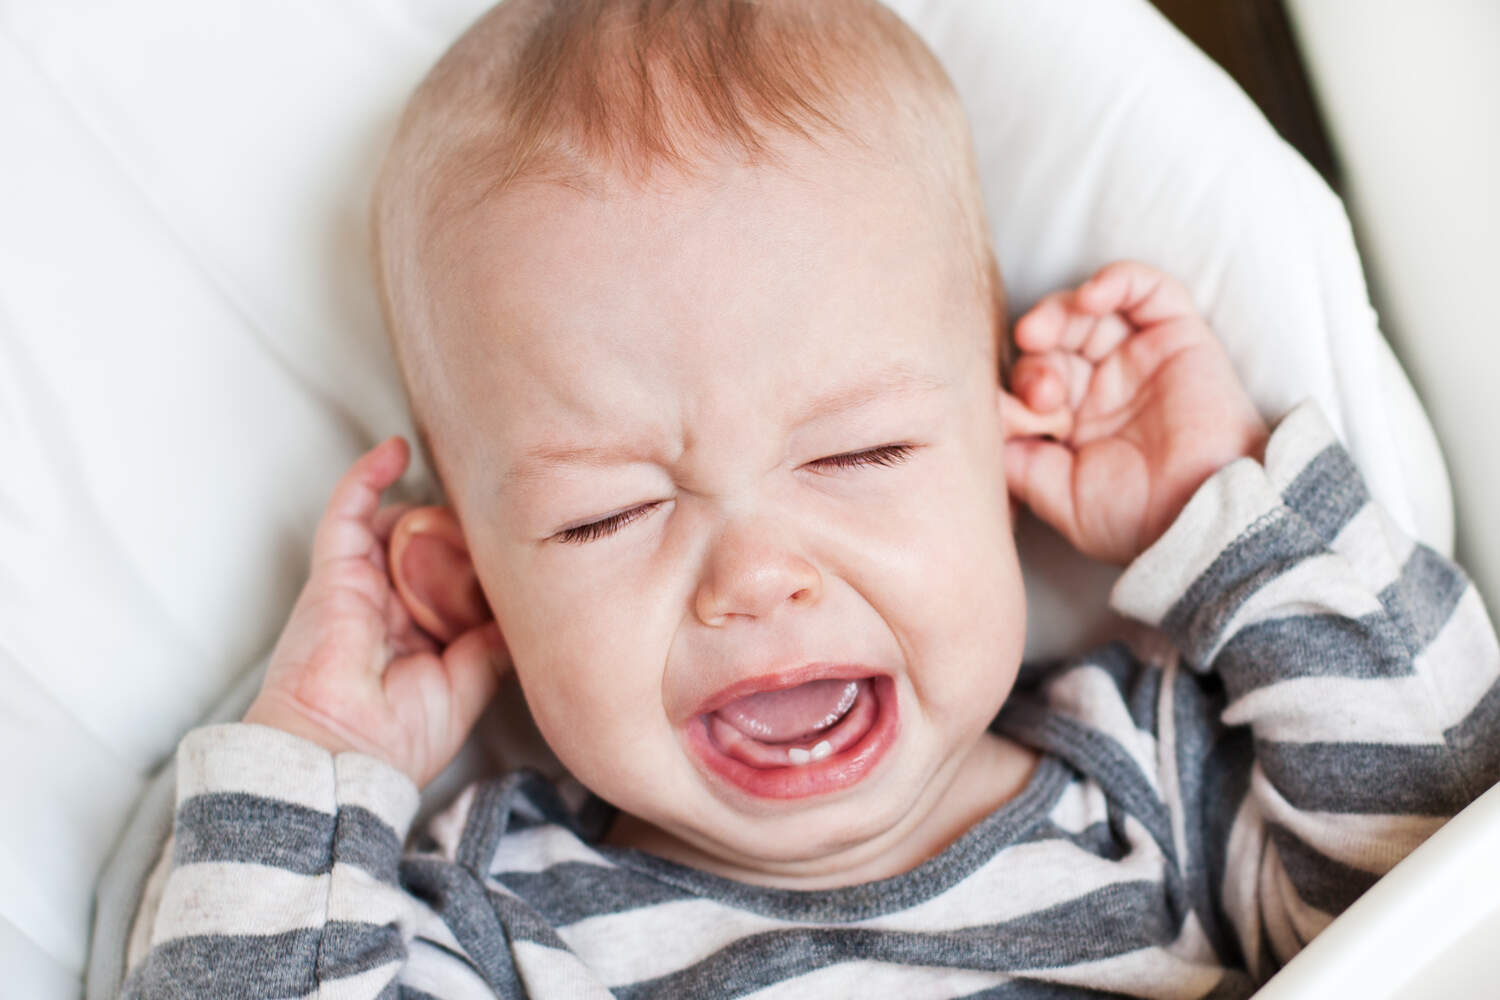 Ear infections can be a cause for hearing loss  in toddlers